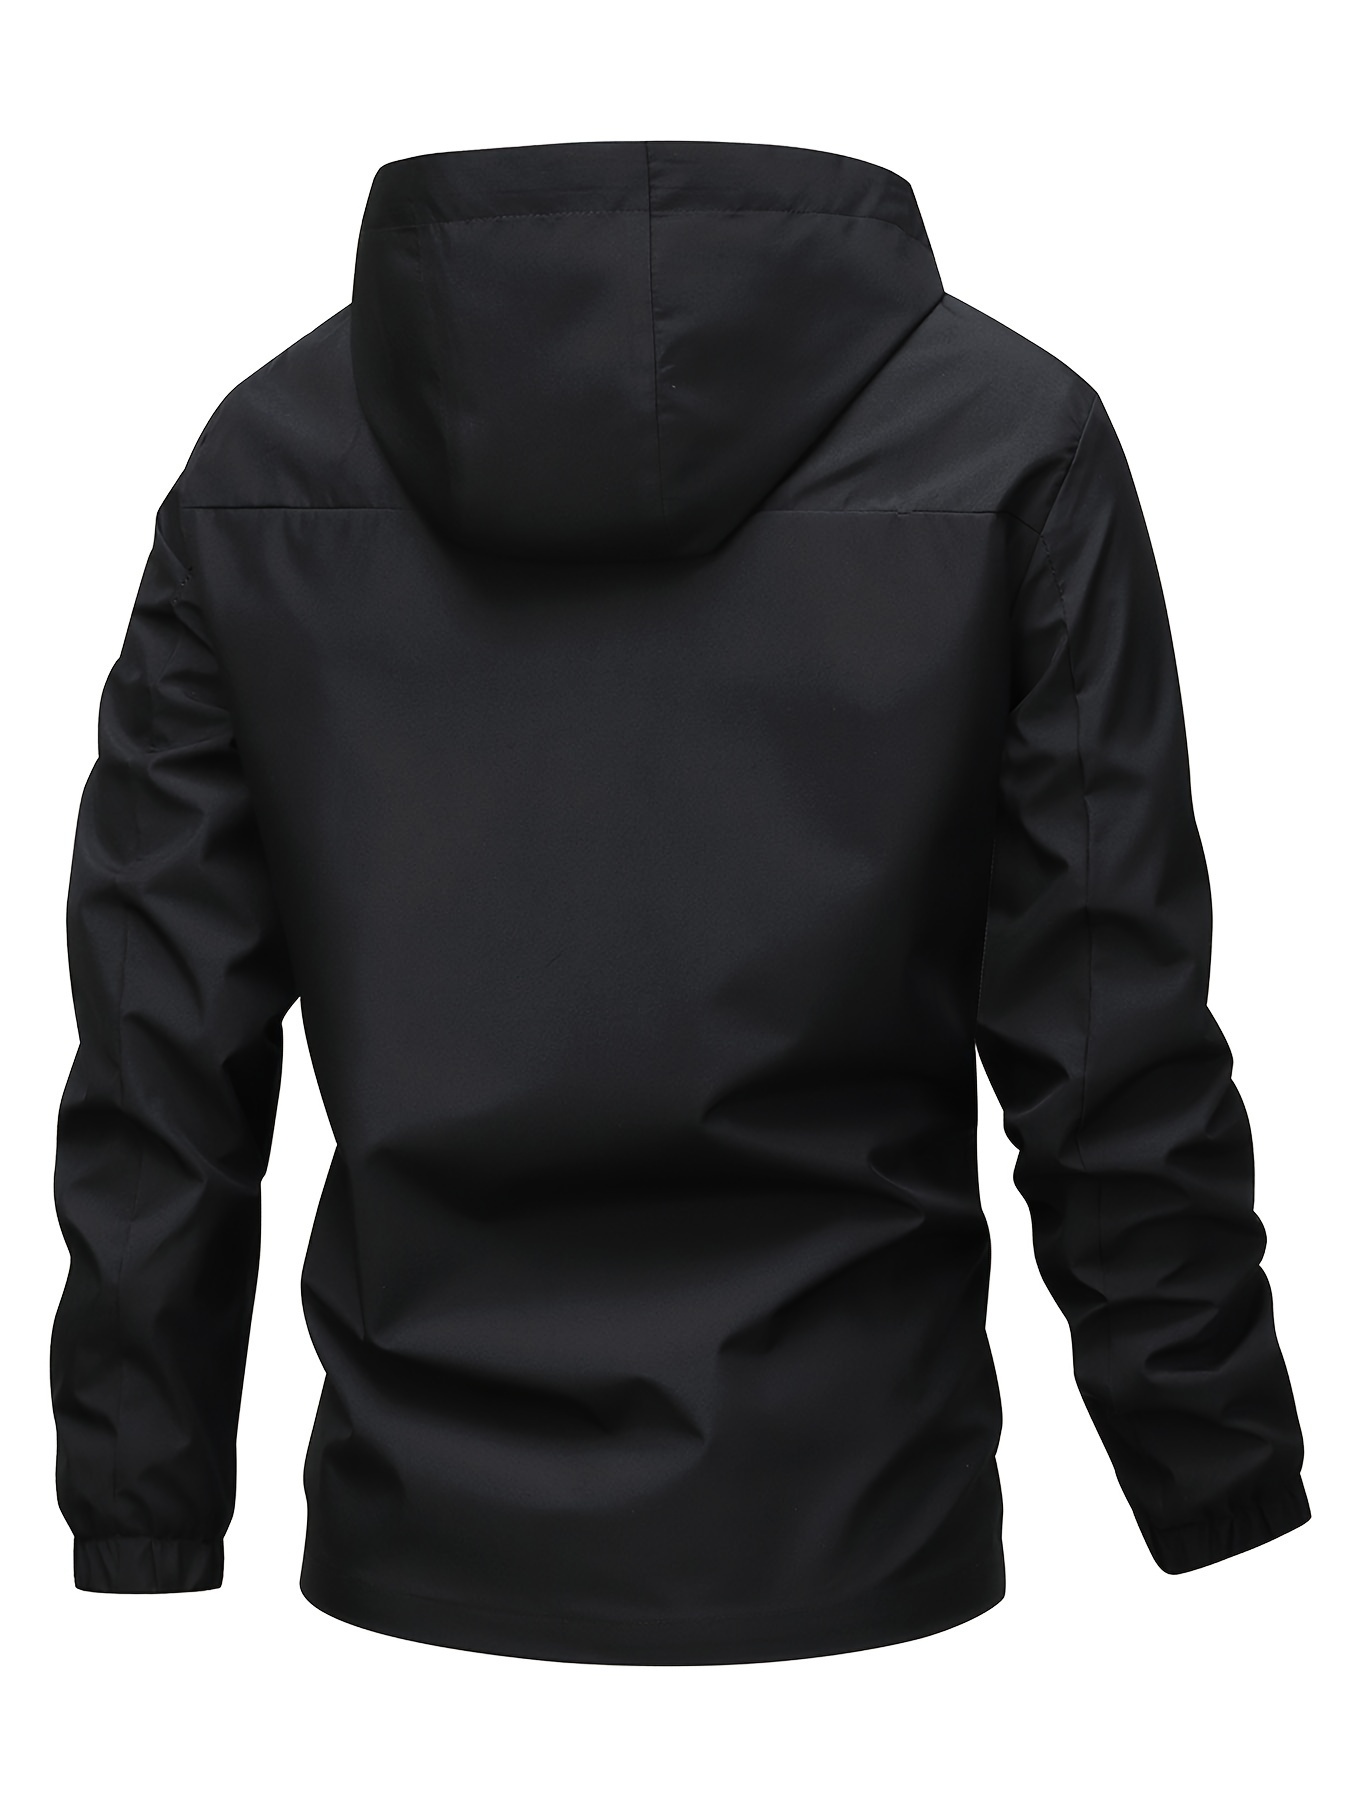 mens casual hooded zip up jacket with zipper pockets windproof outdoor jacket mens clothing details 5